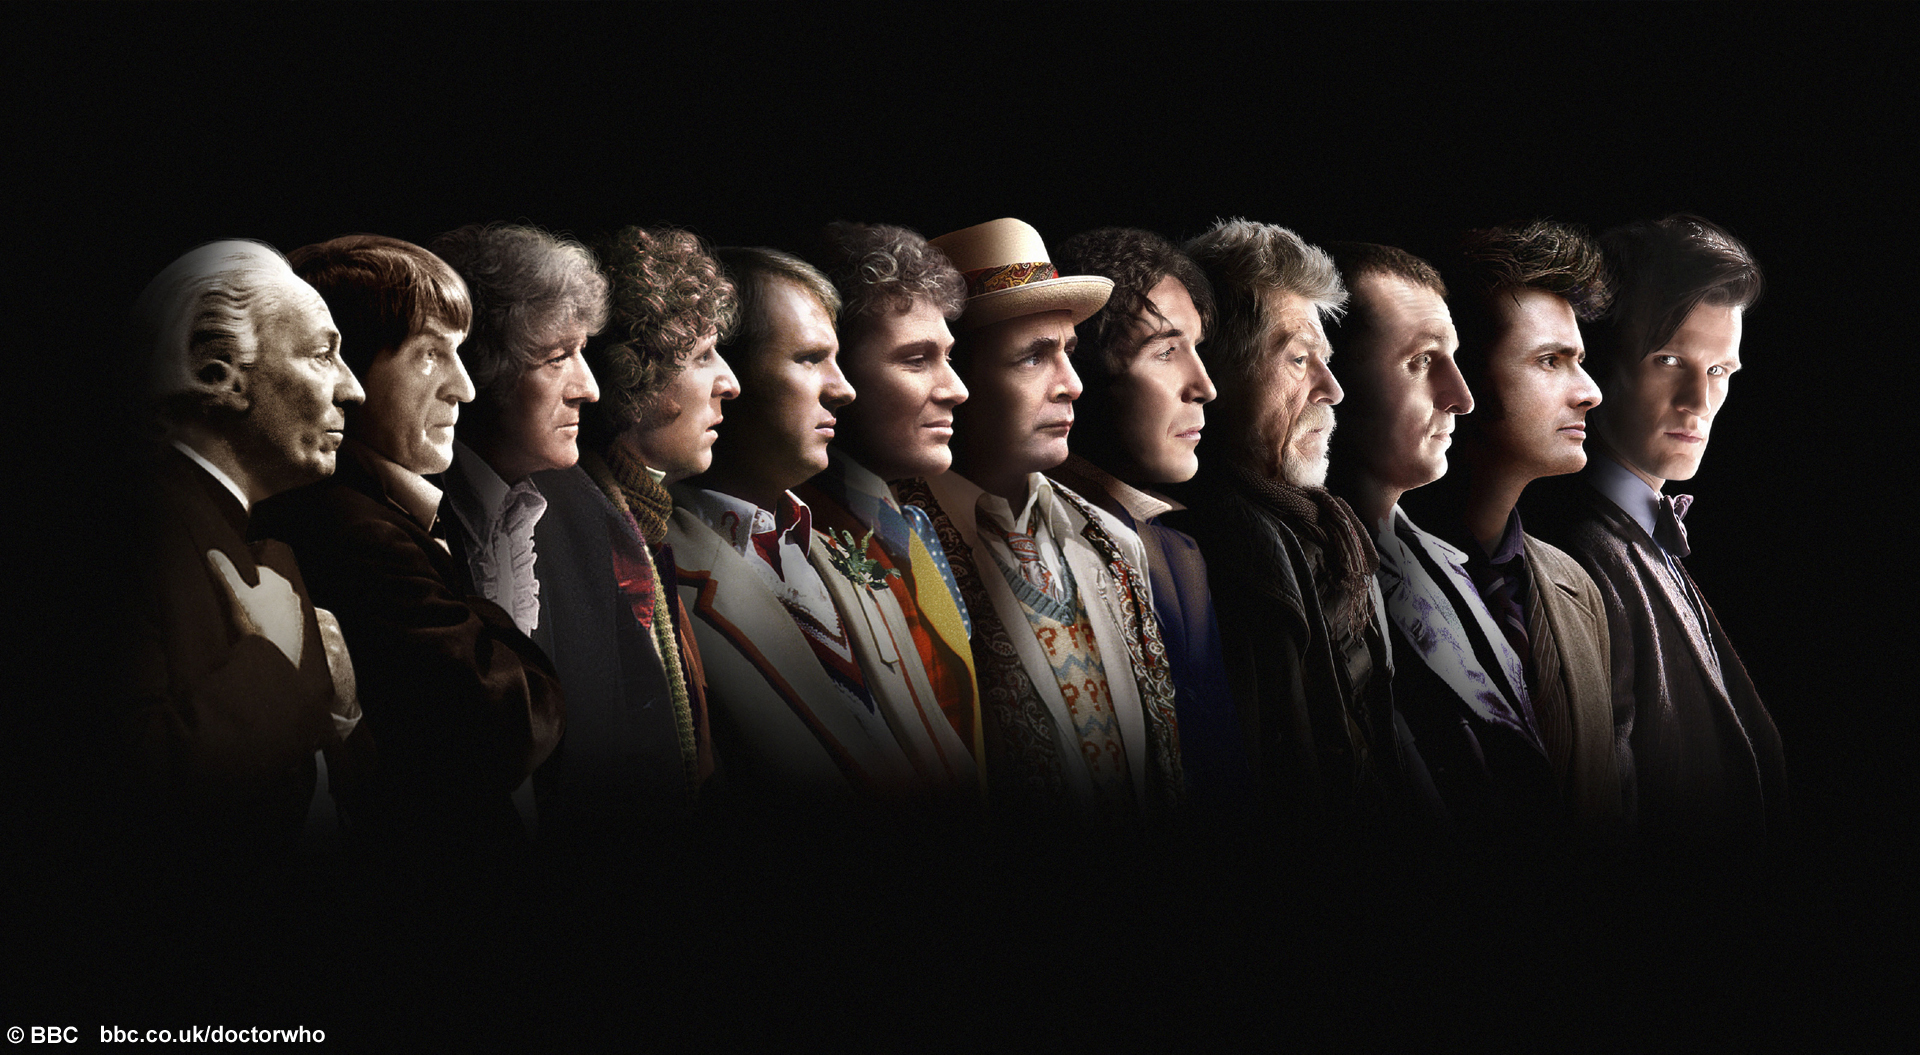 Doctor Who Doctors Wallpaper Of The